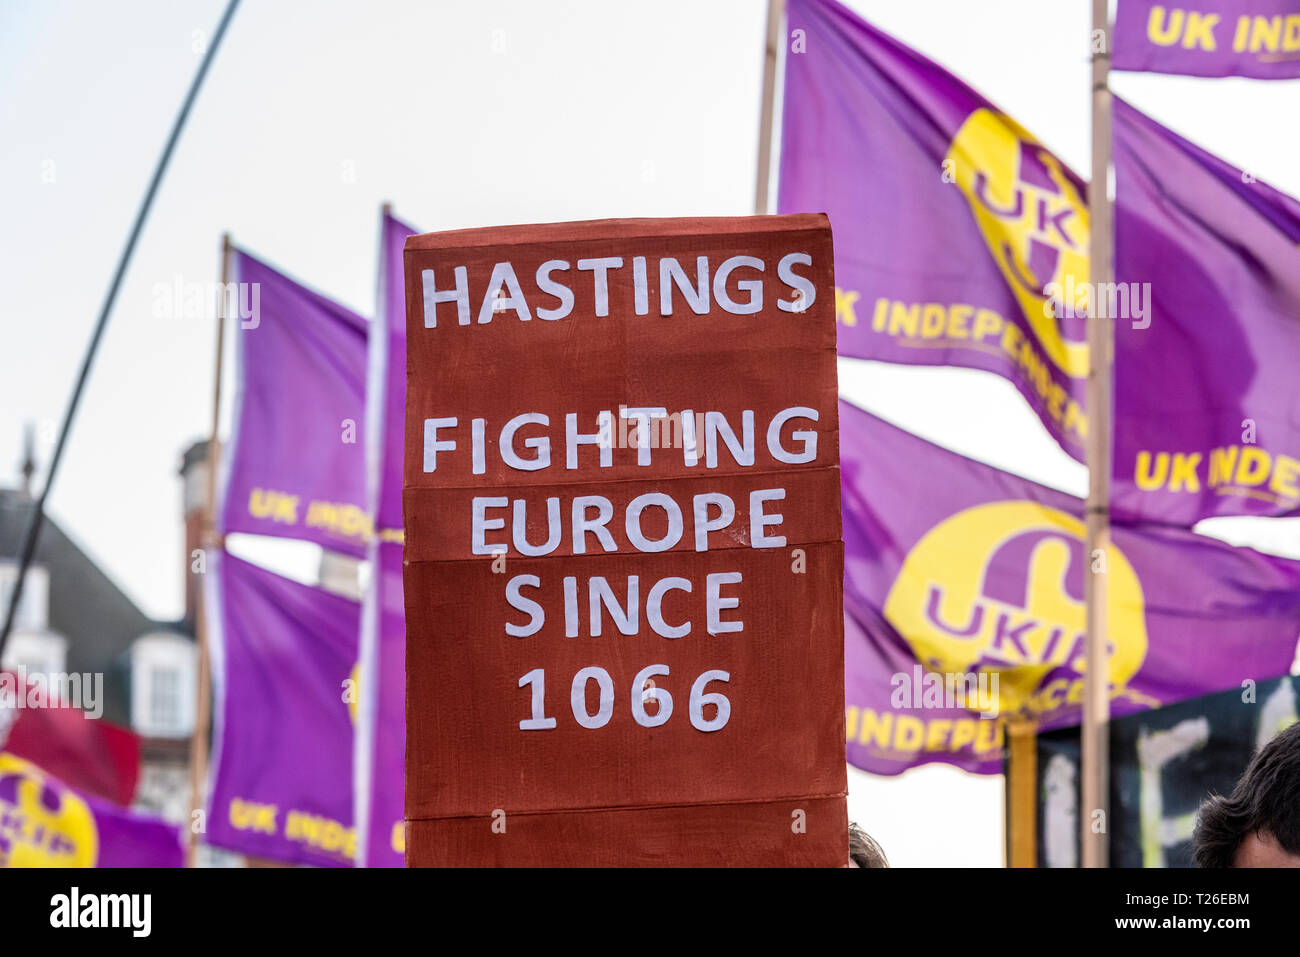 Battle of Hastings reference placard at the Brexit Betrayal protest rally march with UKIP flags. Fighting Europe since 1066. Humorous placard, London Stock Photo